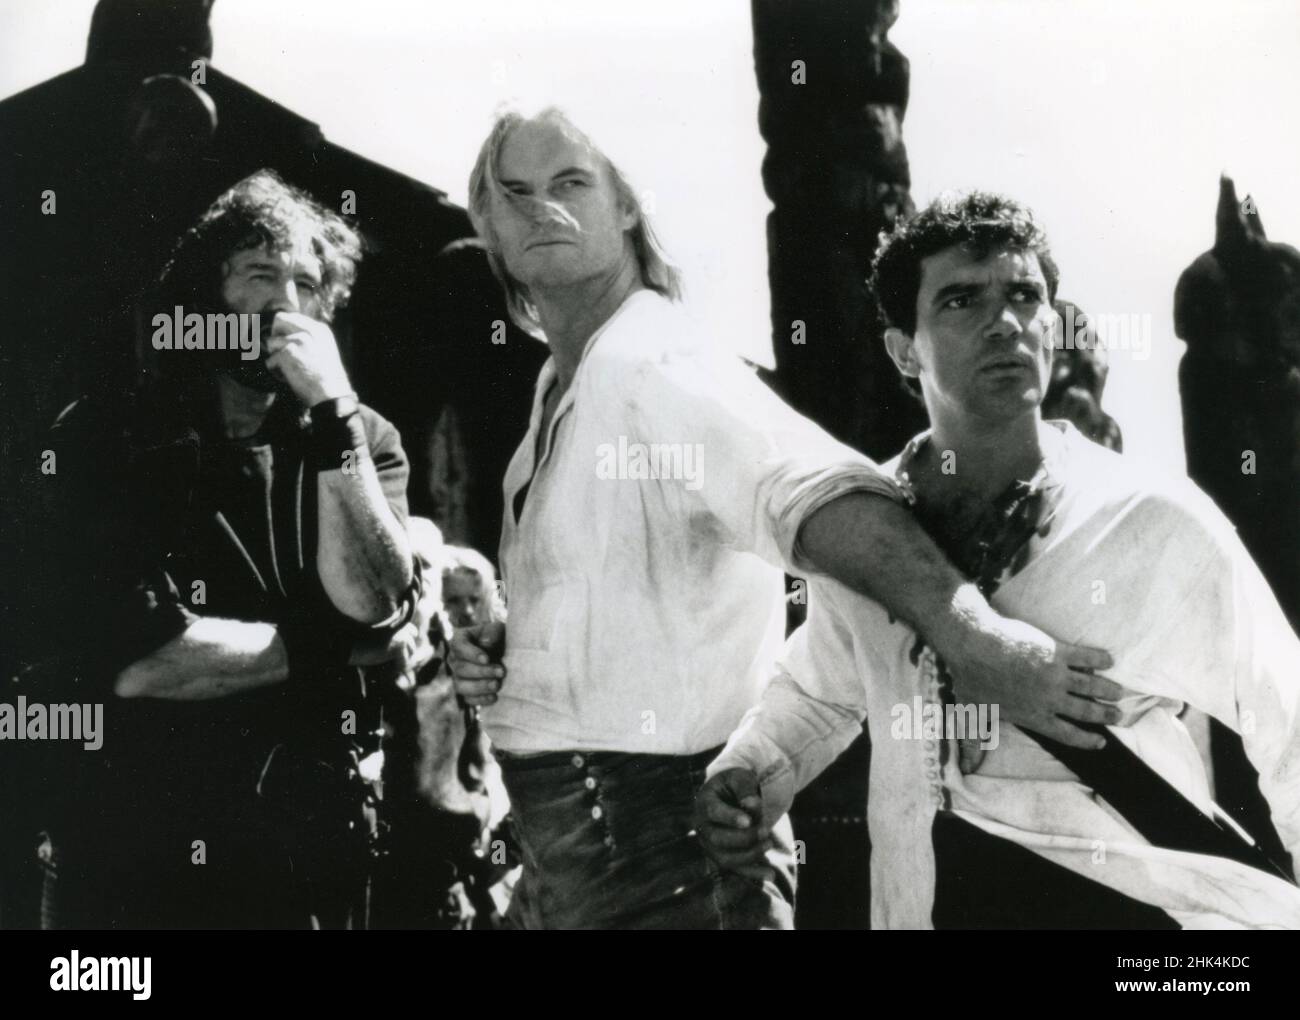 Actors Clive Russell, Vladimir Kulich, and Antonio Banderas in the movie The 13th Warrior, USA 1999 Stock Photo